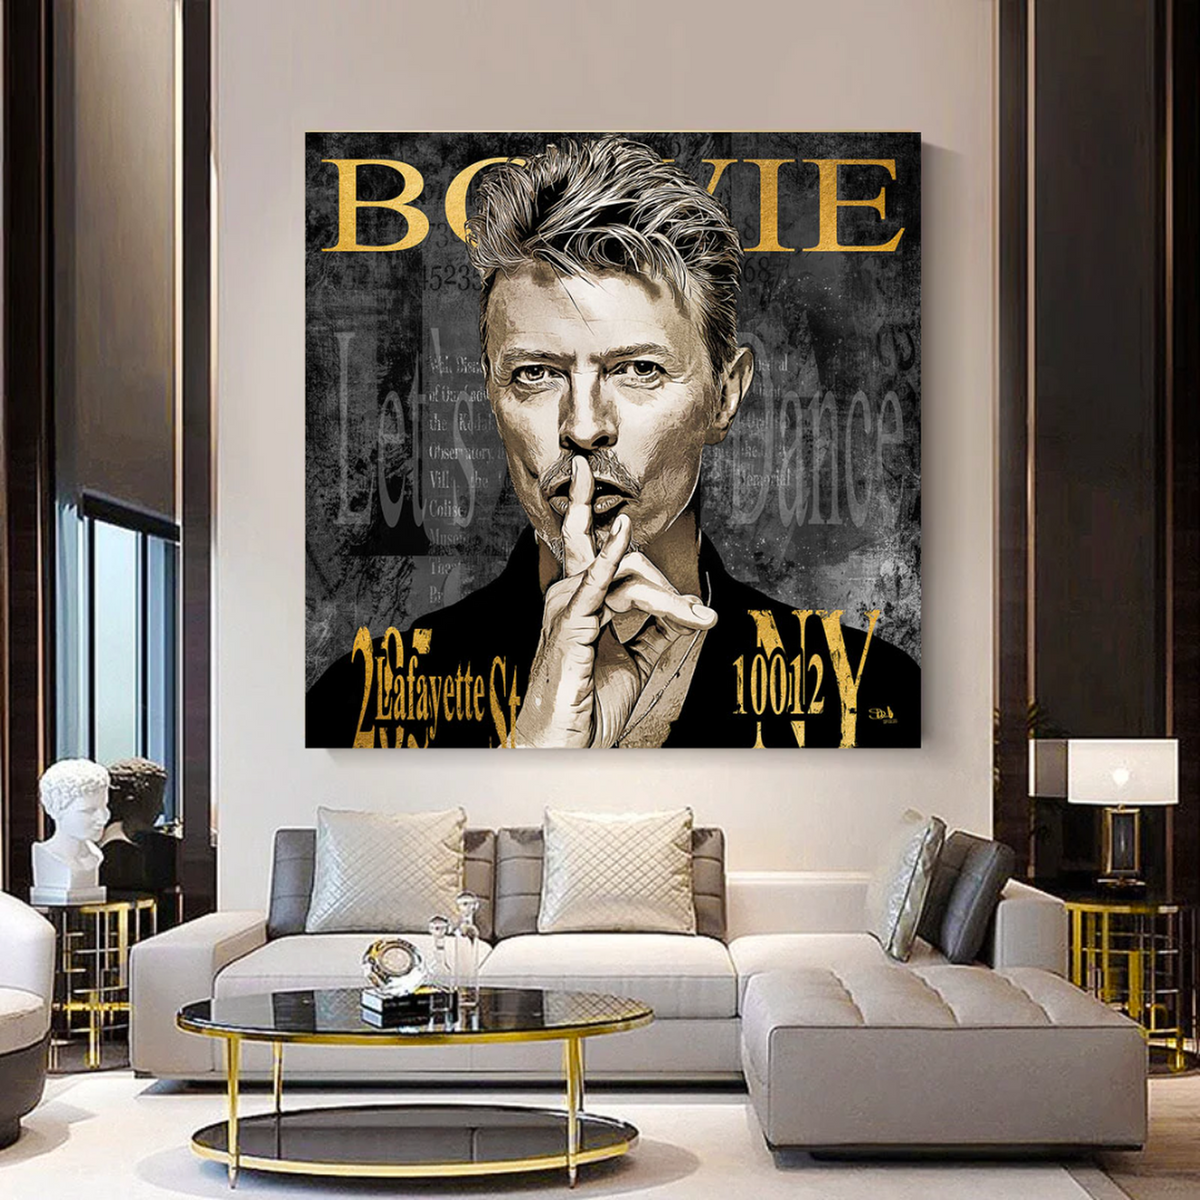 David Bowie Canvas Wall Art Exquisite Collection for Fans